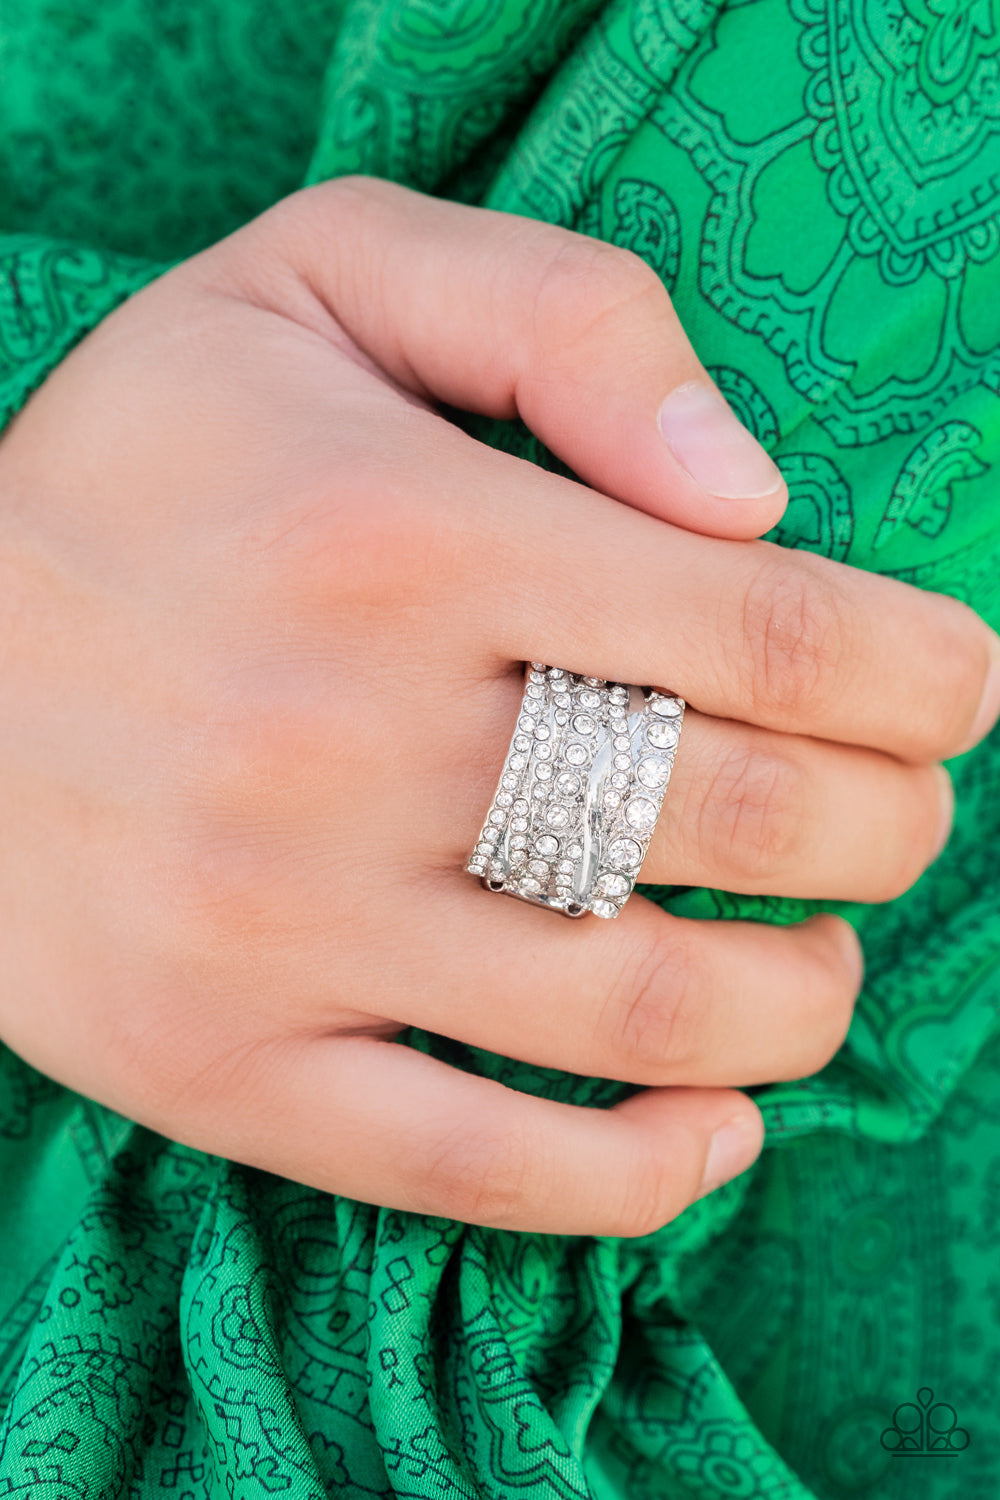 Exclusive Elegance White Ring - Paparazzi Accessories  Row after row of radiantly mismatched white rhinestones and glistening silver bands haphazardly stack across the finger, coalescing into a dramatic display of dazzle. Features a stretchy band for a flexible fit.  All Paparazzi Accessories are lead free and nickel free!  Sold as one individual ring.